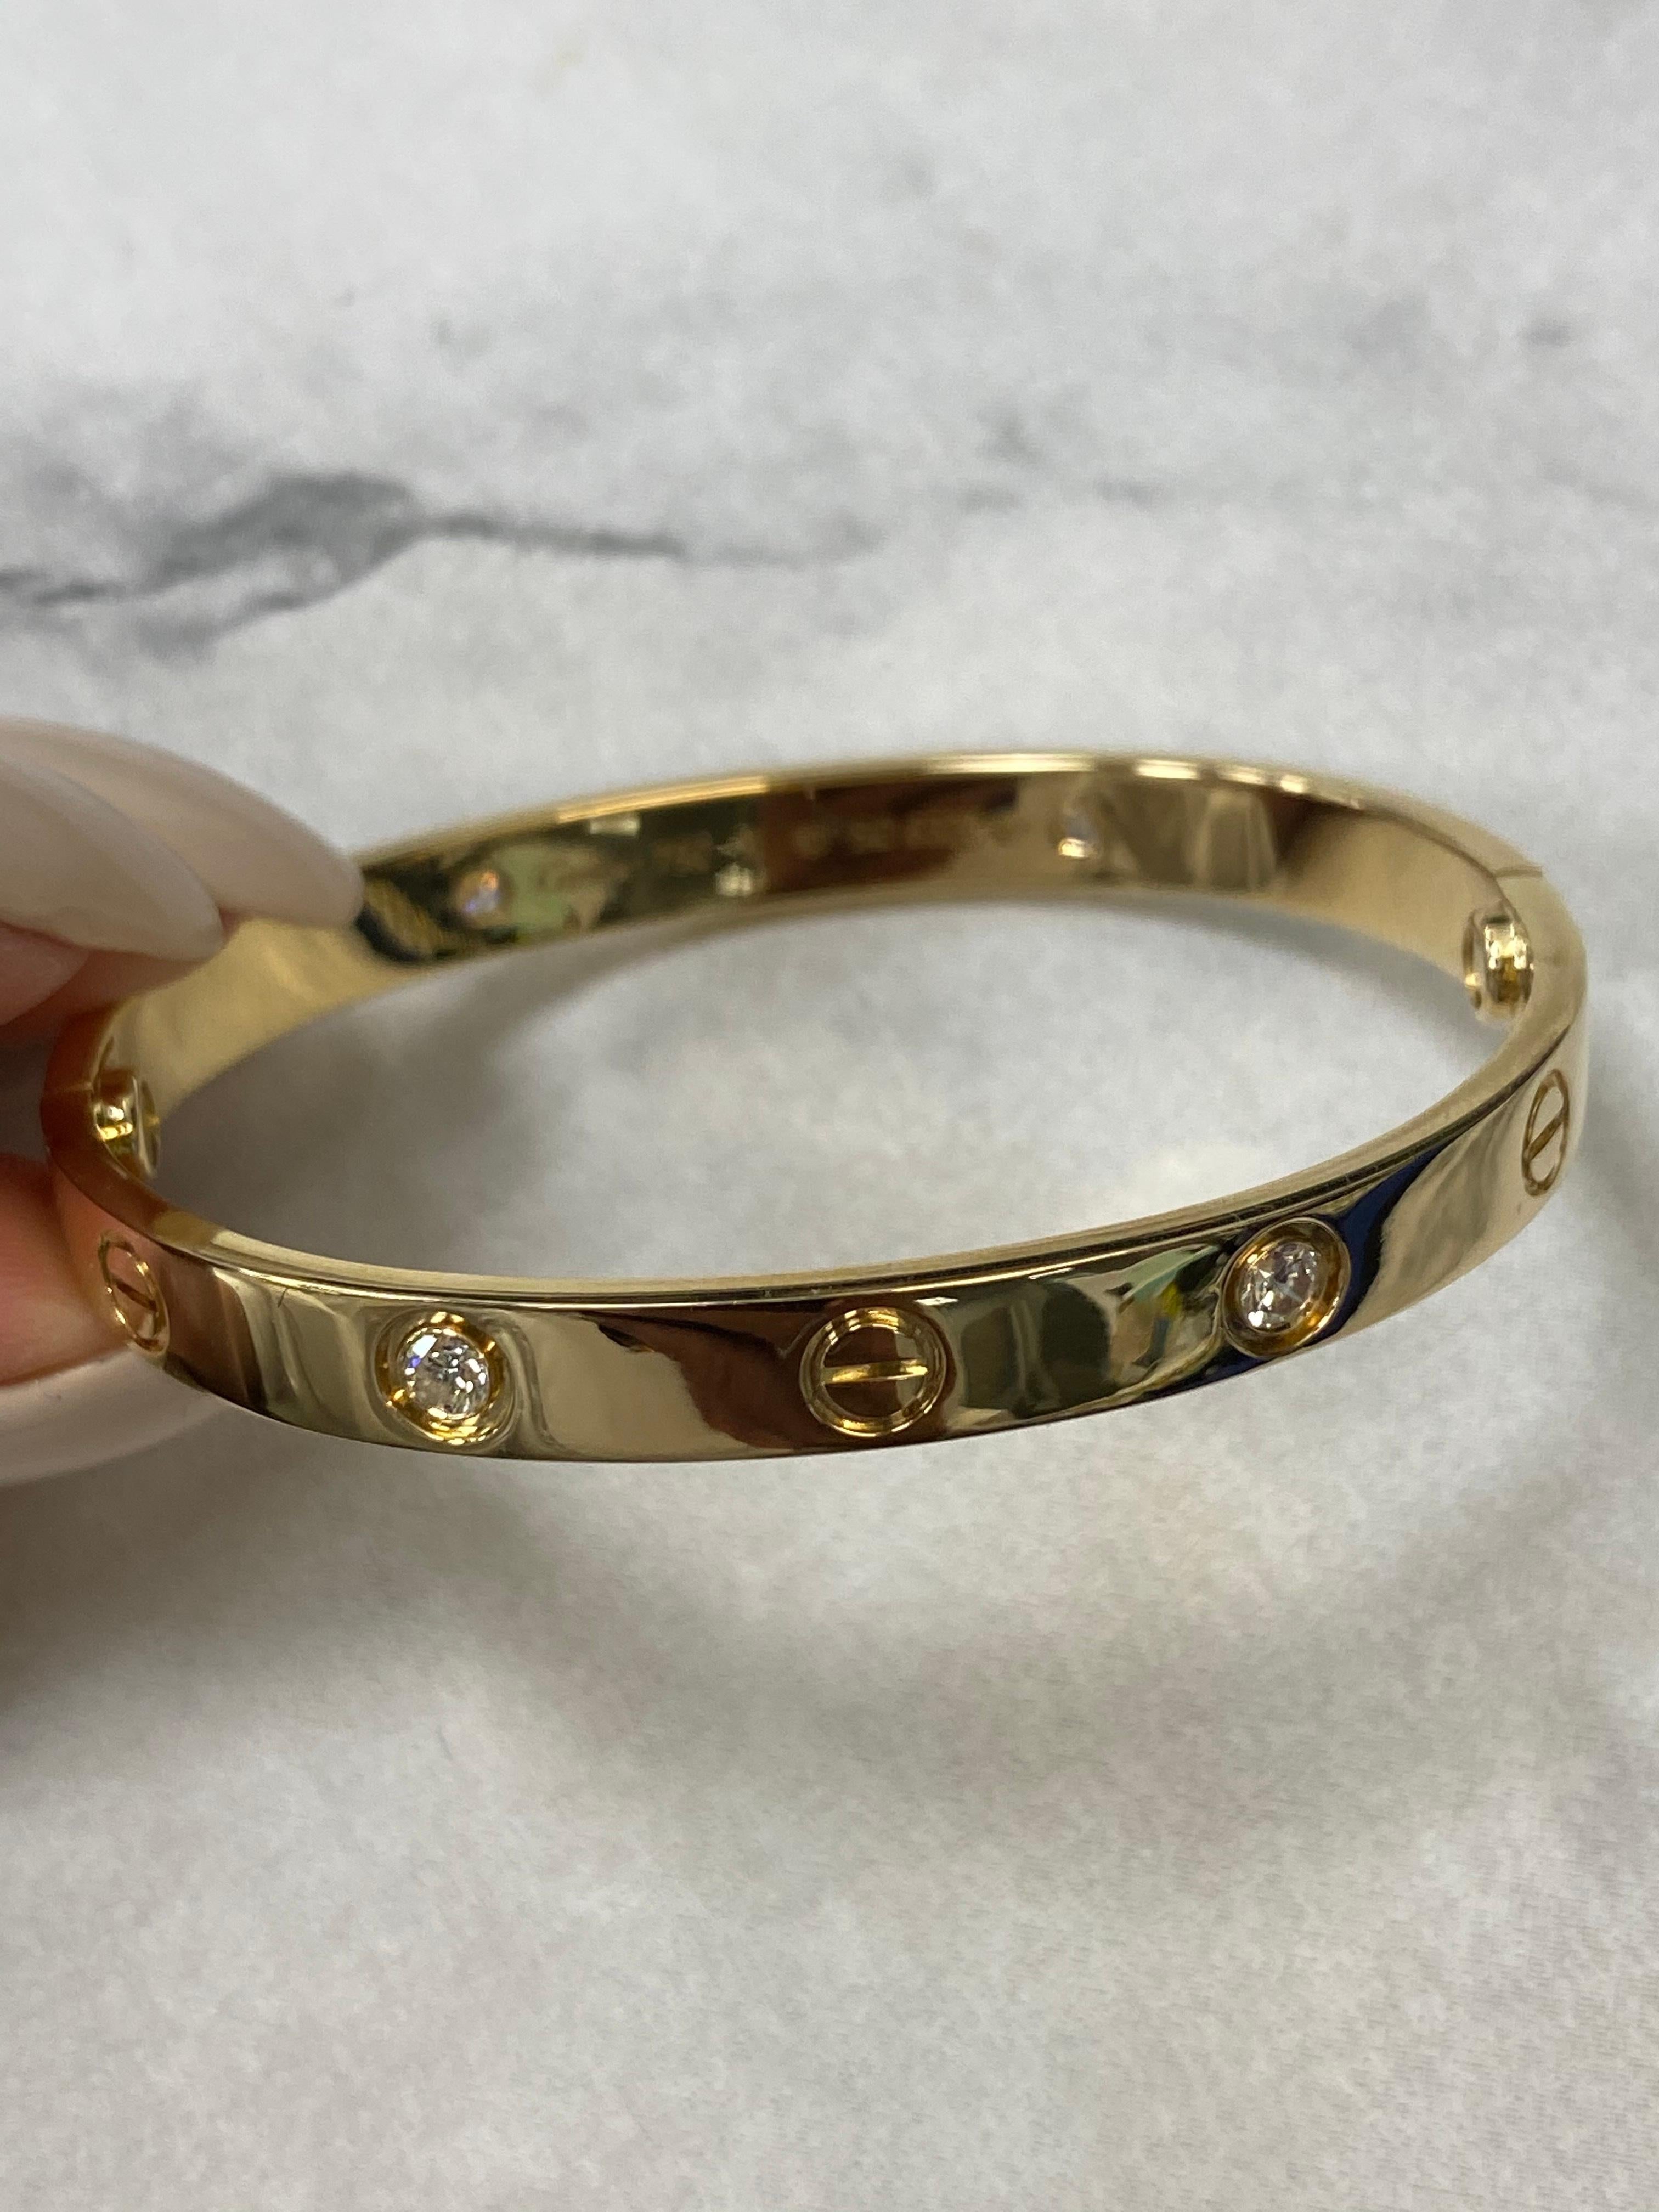 Cartier Love 4 Diamonds Bracelet 18K Yellow Gold Size 16 In Excellent Condition For Sale In New York, NY